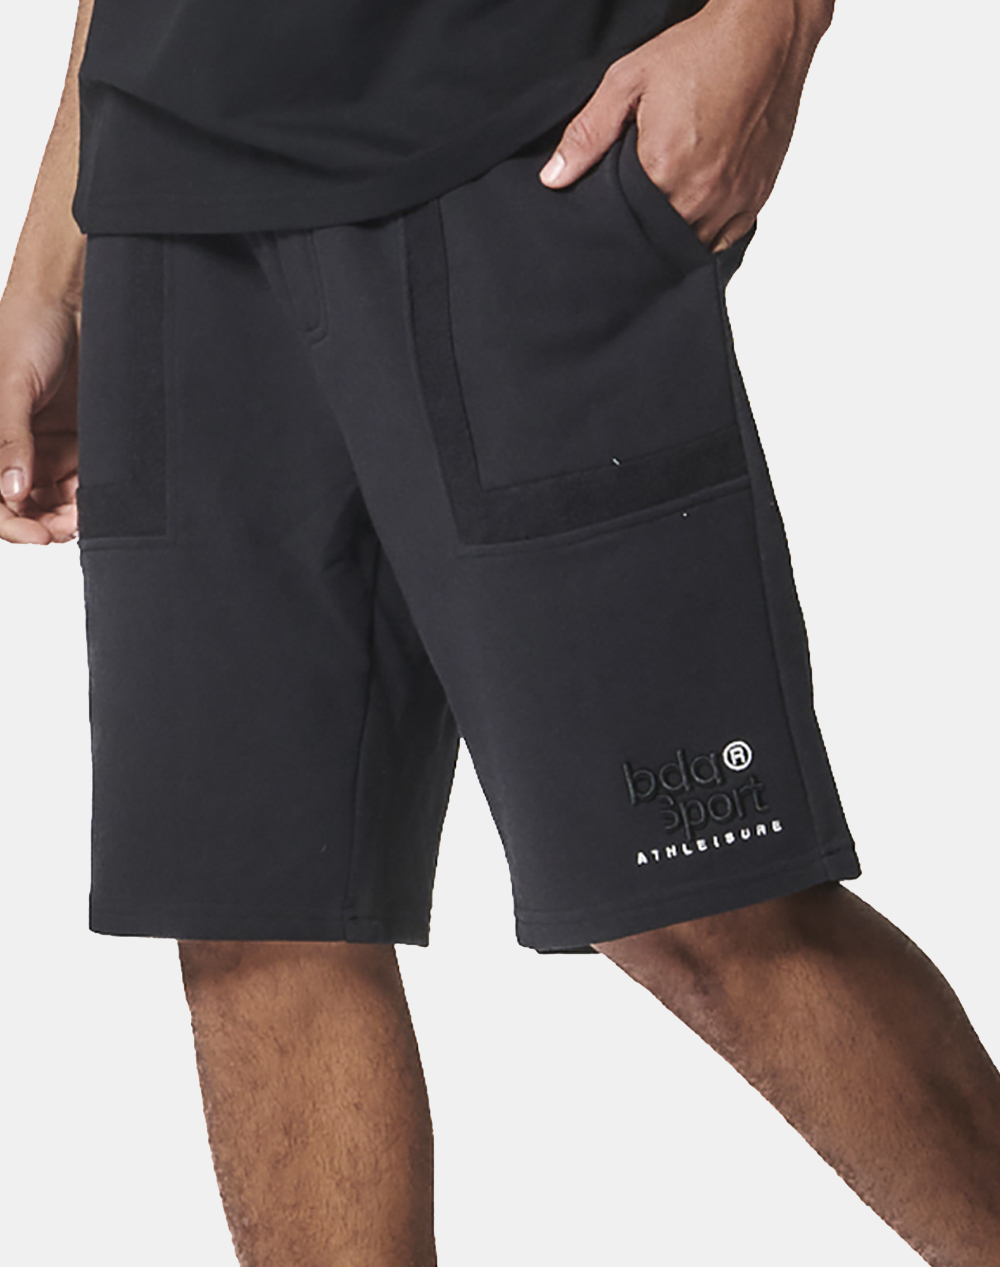 BODY ACTION MEN”S ATHLETIC SHORTS W/EMBROIDERY 033421-01-BLACK Black 3820PBODY2300037_2813